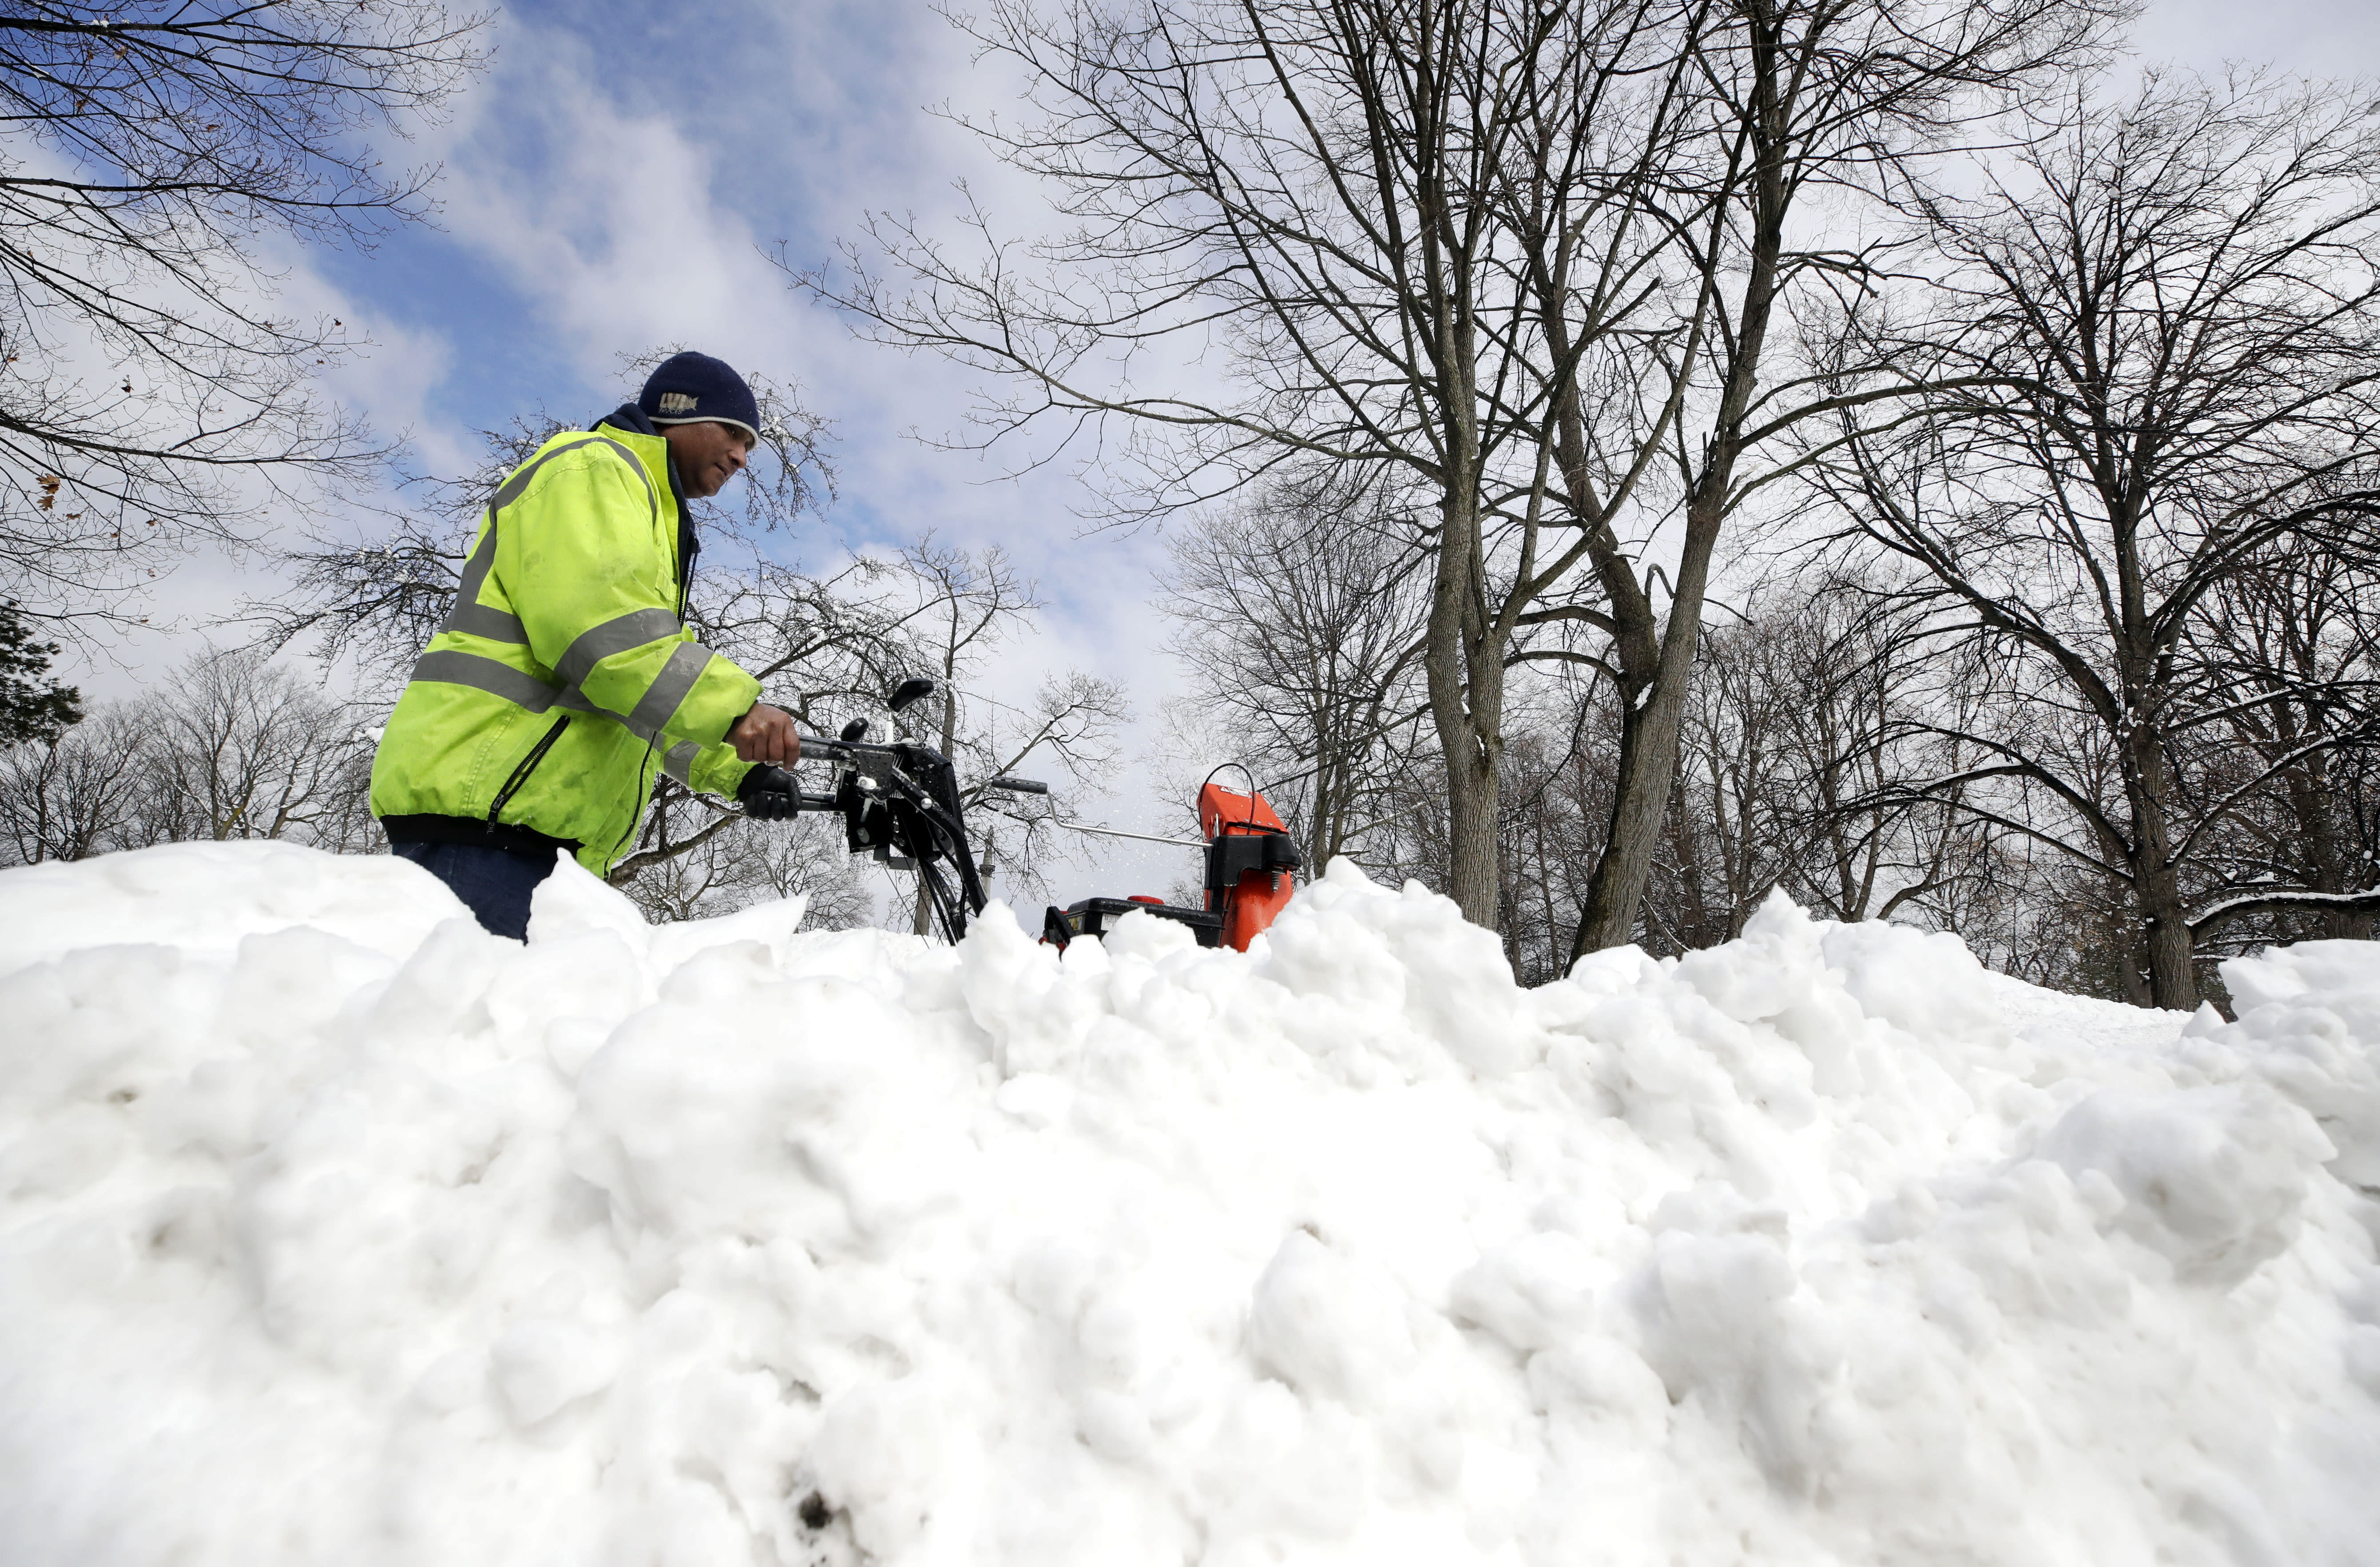 The Latest Icy conditions likely after major snowstorm